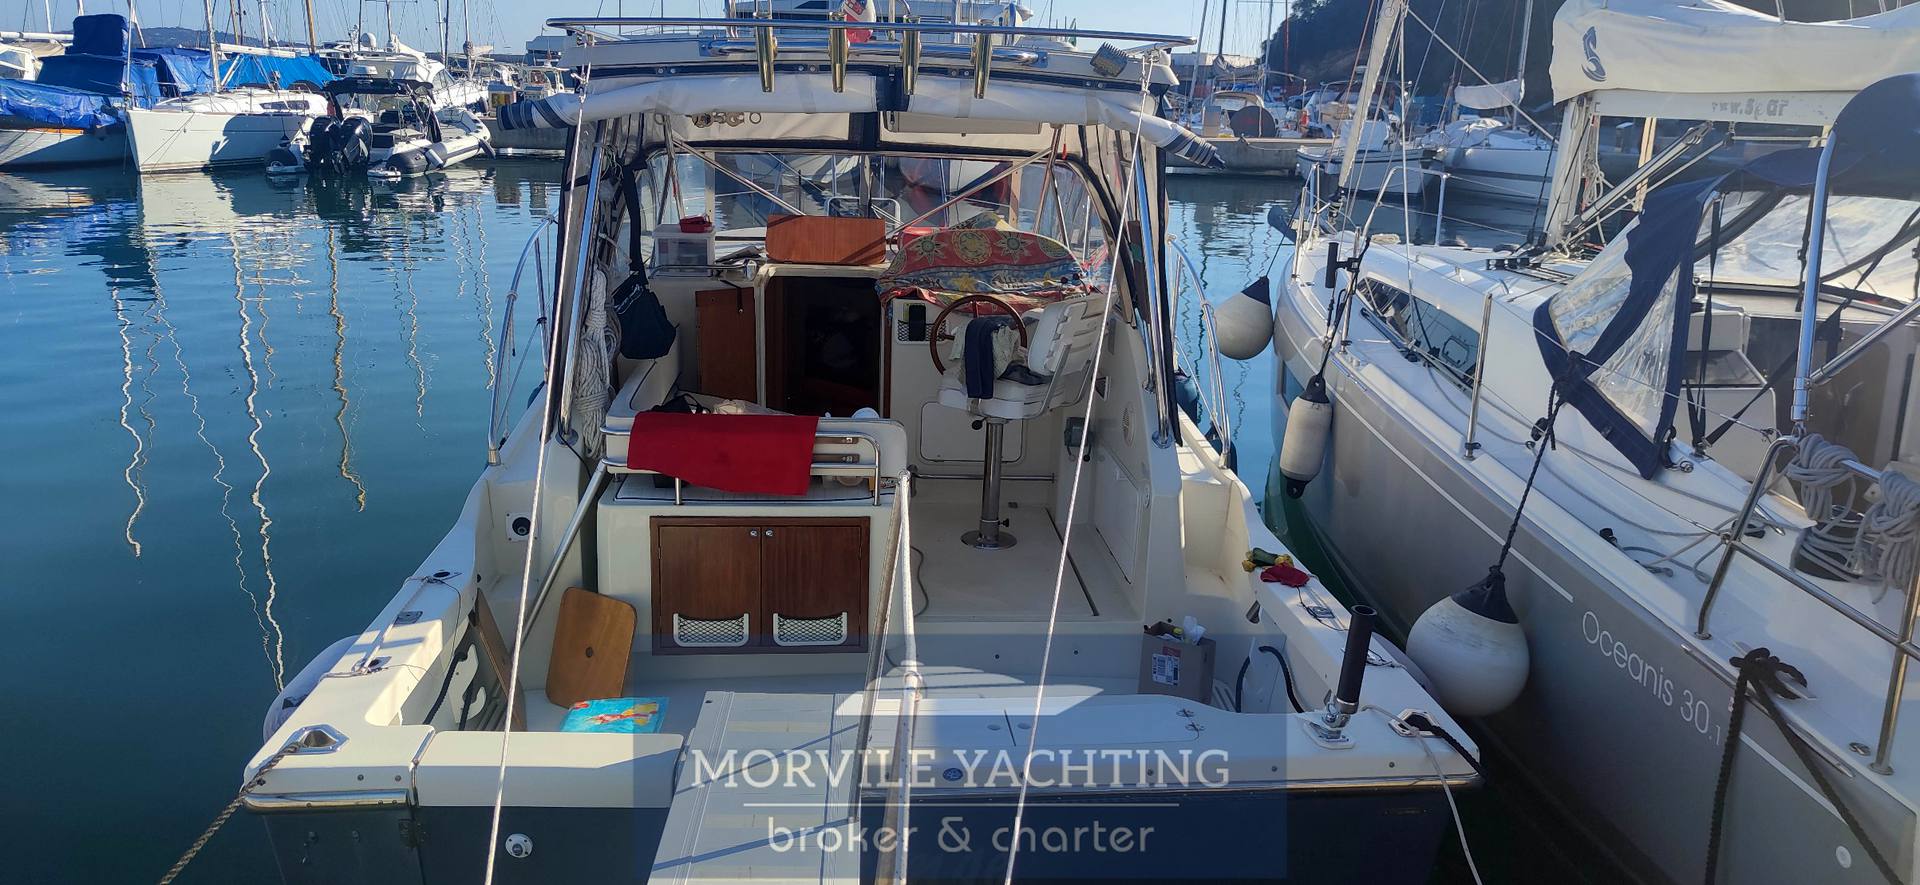 TUCCOLI Moby dick t280 Motor boat used for sale